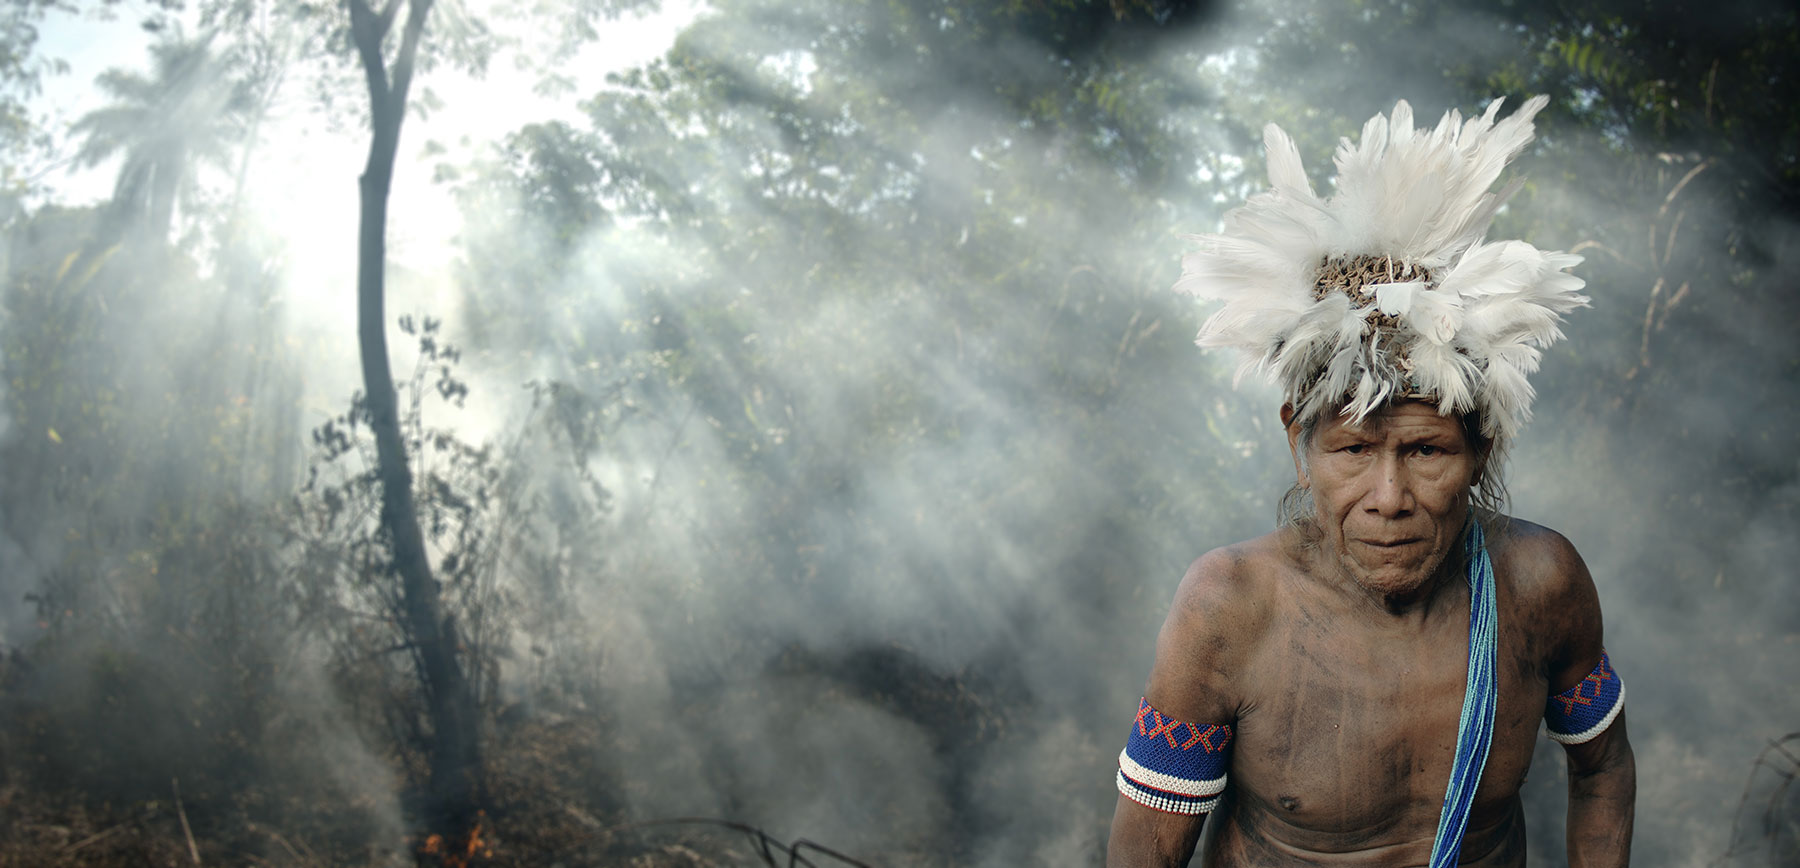 indigenous man in smokey forest